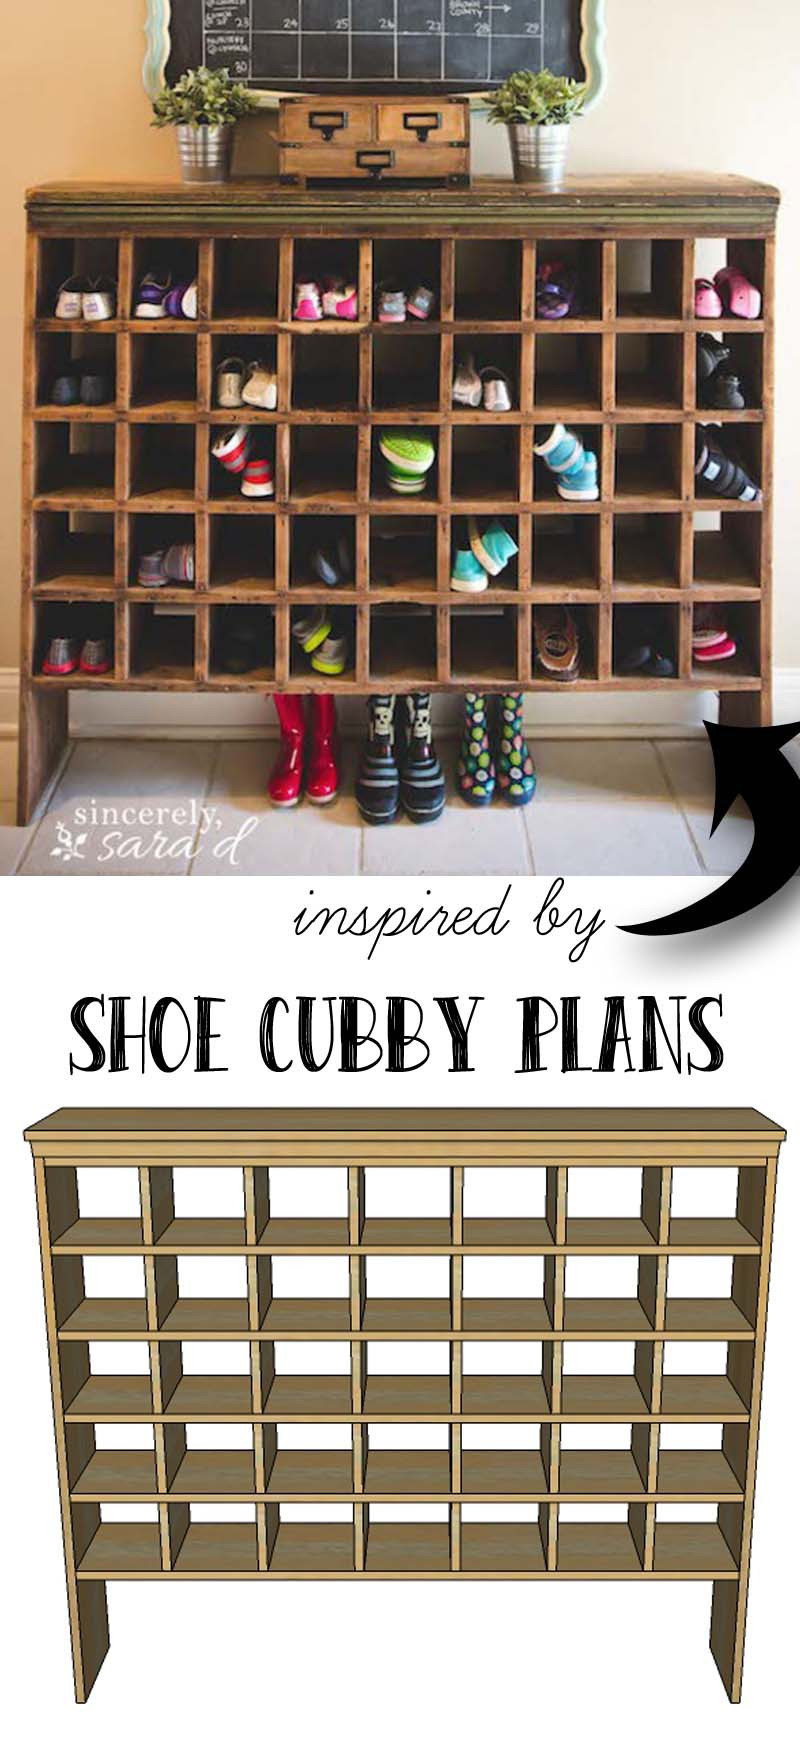 DIY Cubby Storage Plans
 Build Your Own Shoe Cubby with Remodelaholic